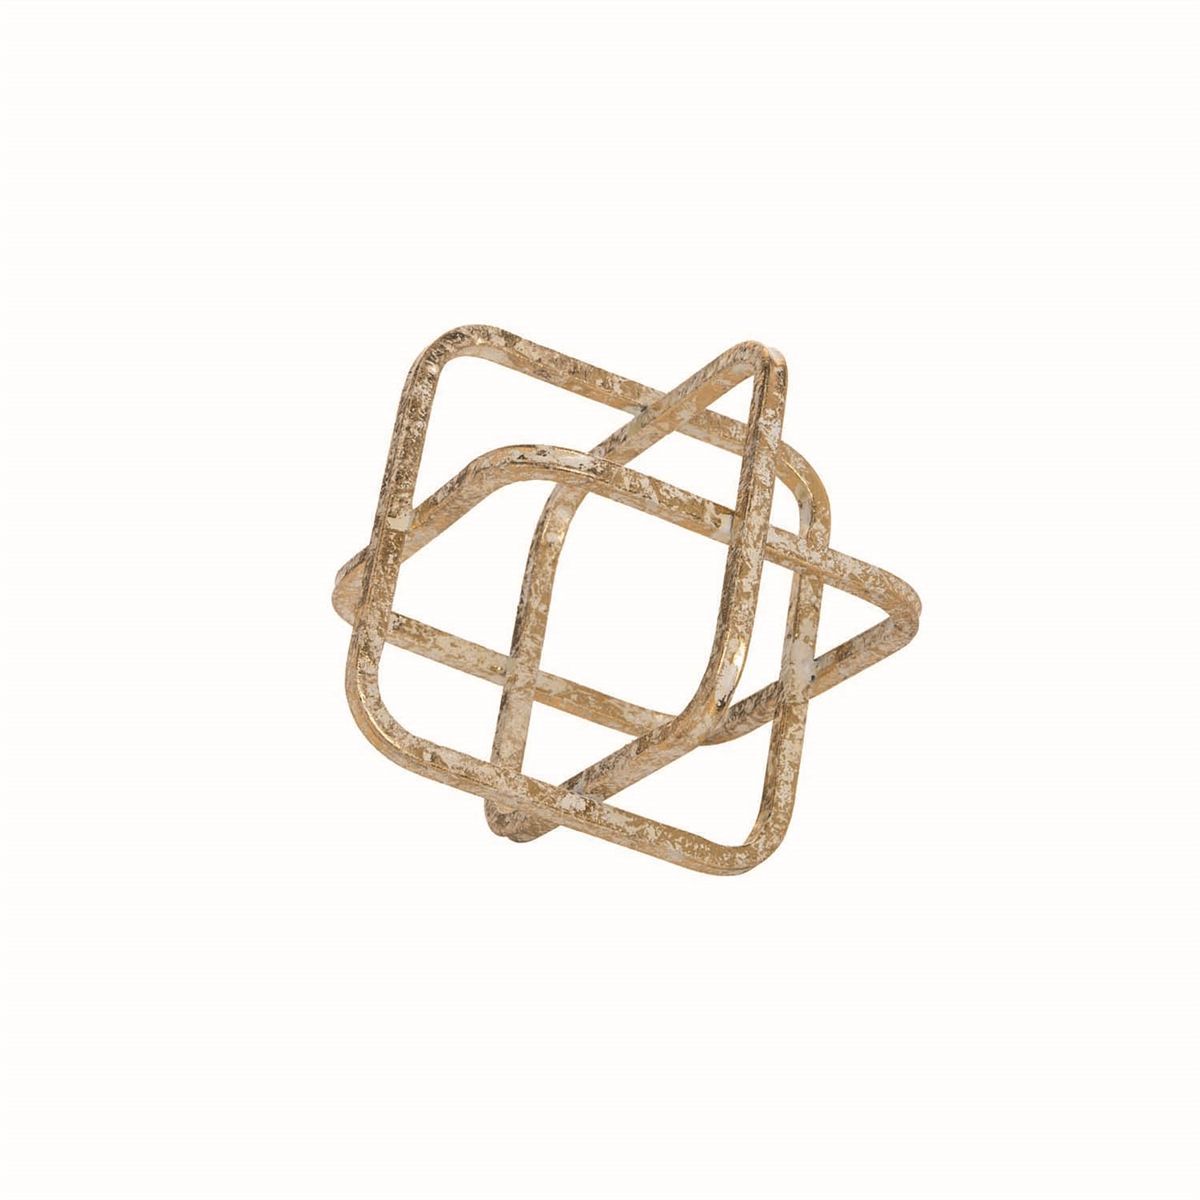 Small Distressed Gold Cube Metal Decorative Sculpture - Foreside Home & Garden | Target